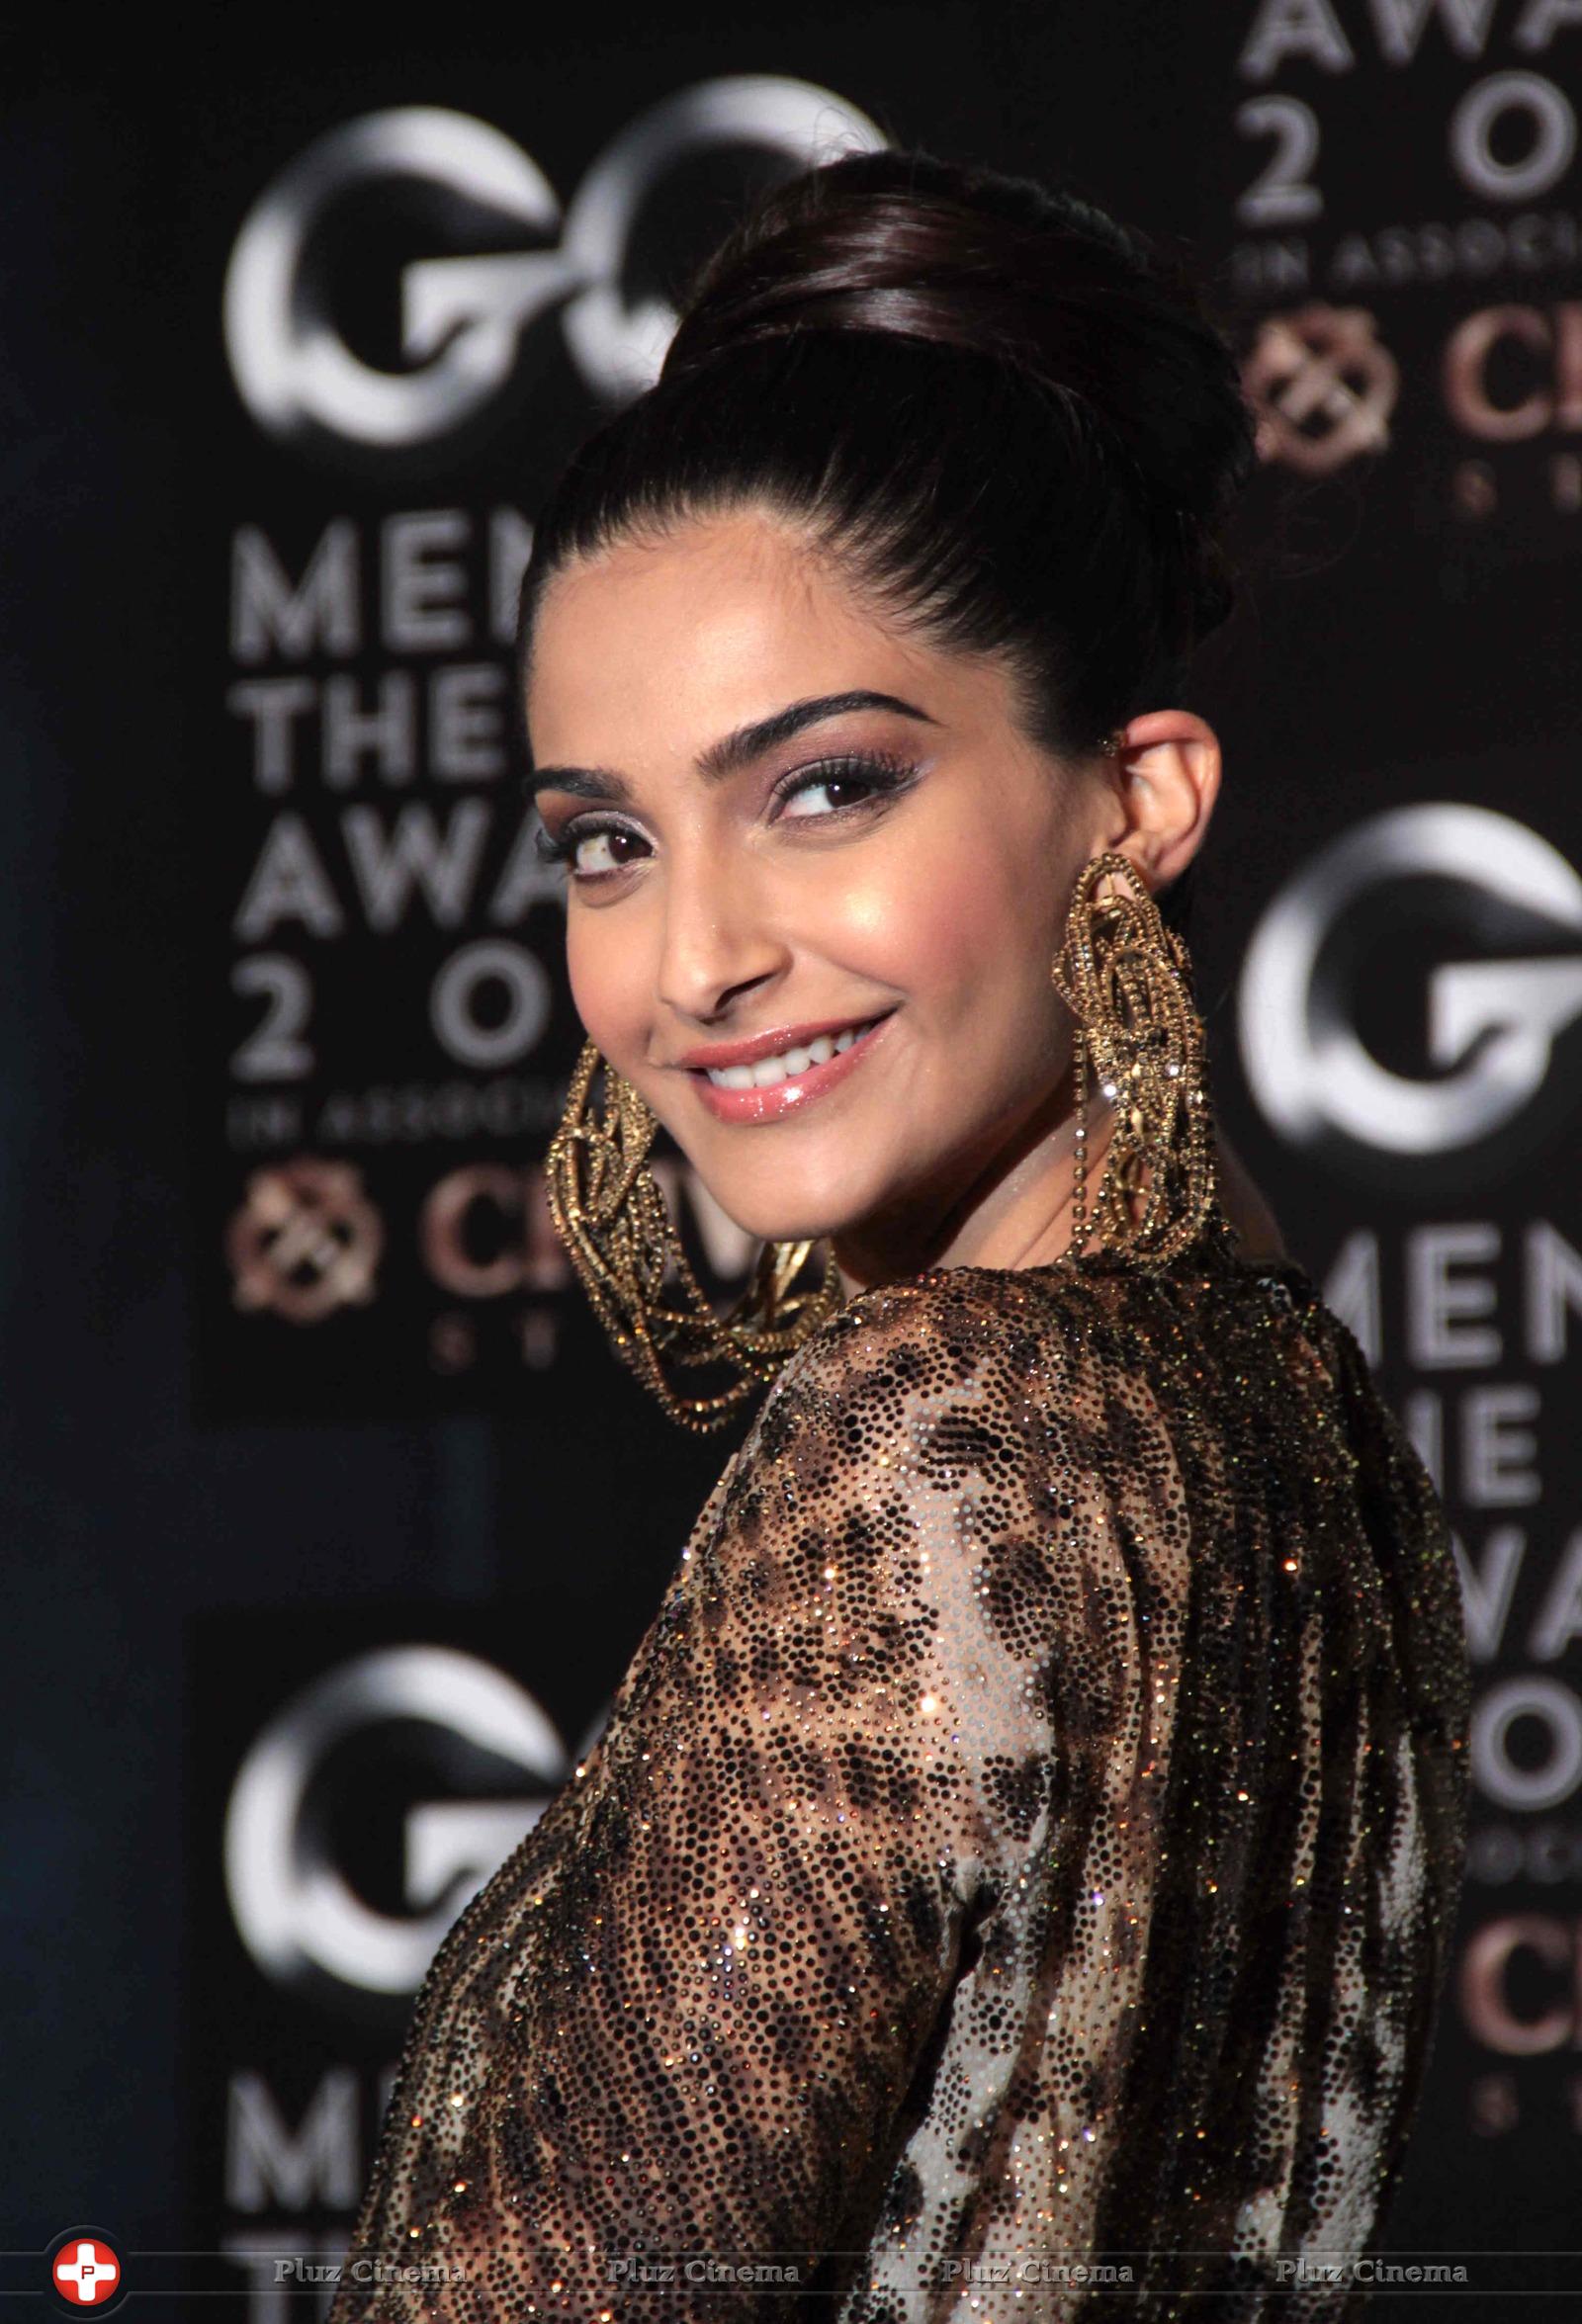 Sonam Kapoor Ahuja - GQ Man of the Year Award 2013 Photos | Picture 591321